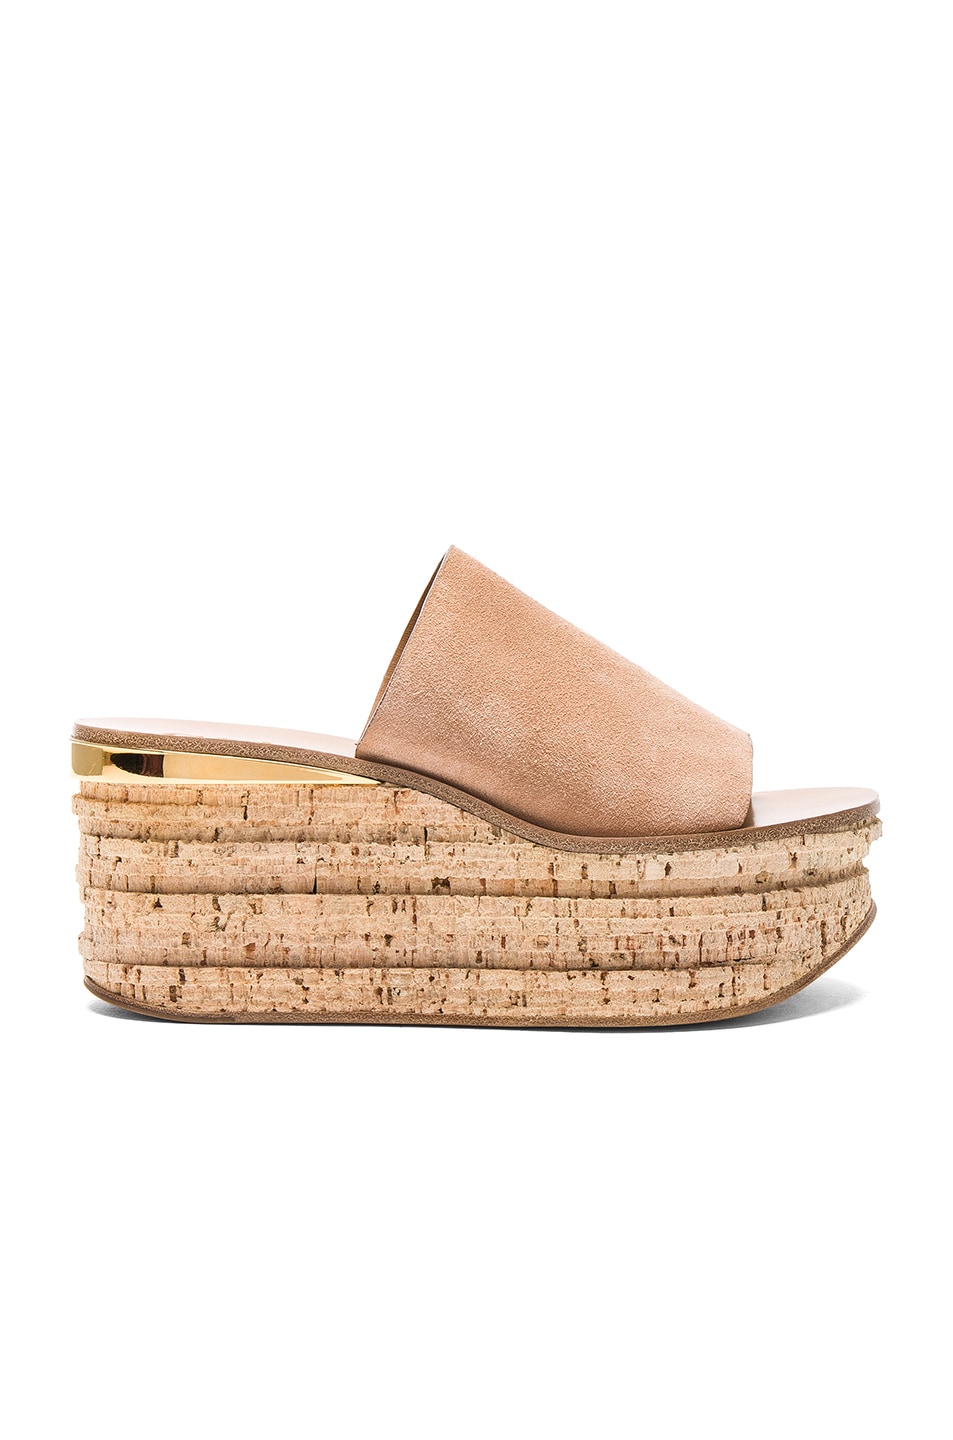 Image 1 of Chloe Camille Suede Wedge Sandals in Maple Pink